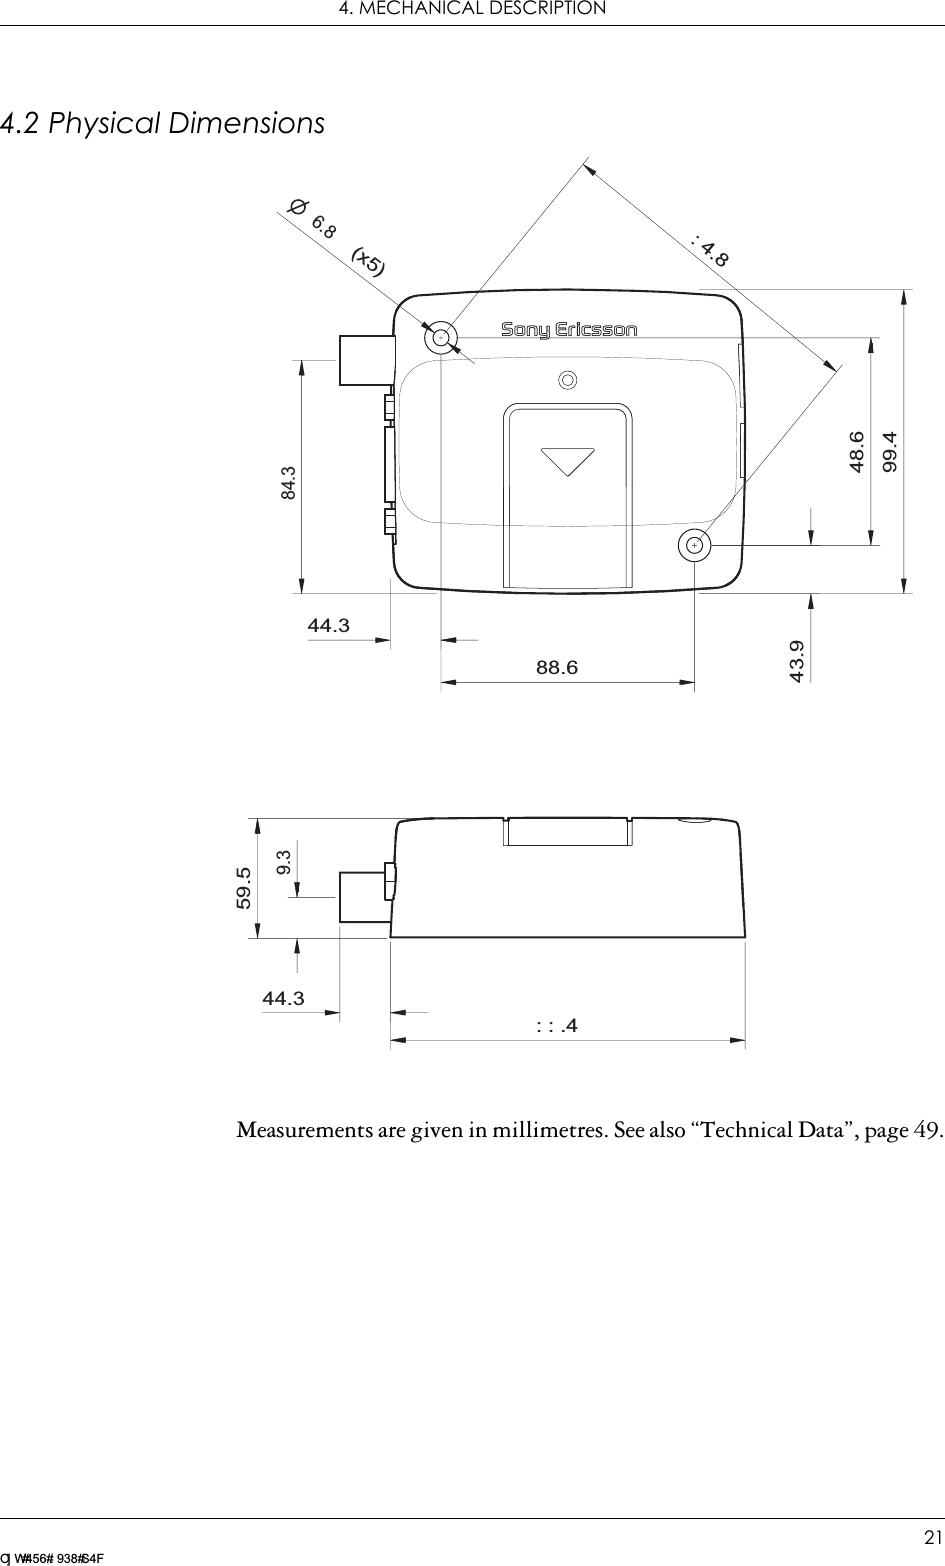 4. MECHANICAL DESCRIPTION21LZ T 123 7605 P1C4.2 Physical DimensionsMeasurements are given in millimetres. See also “Technical Data”, page 49.7 1.566.477.426.211.055.345.310.611.09.051.0(x2)3.5